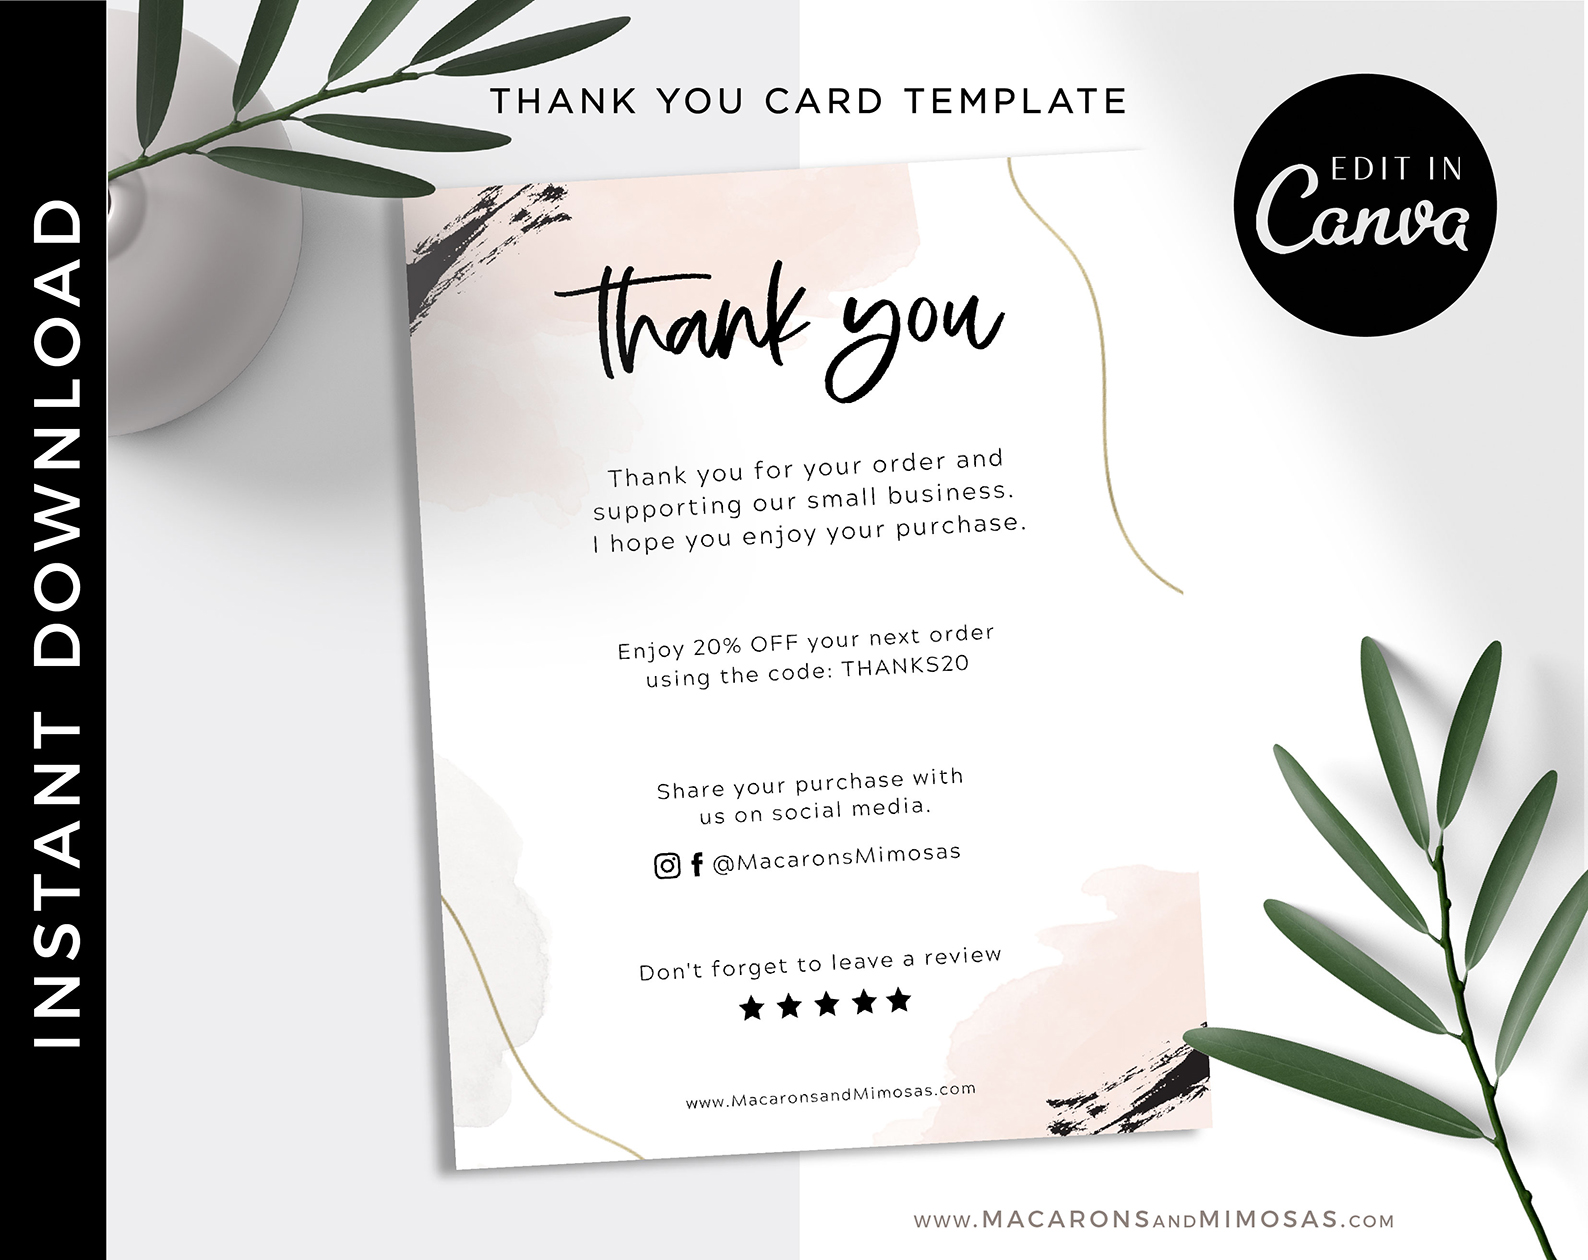 business water paint Thank you cards with coupon template digital download Business Thank You Card Template instantly printable.